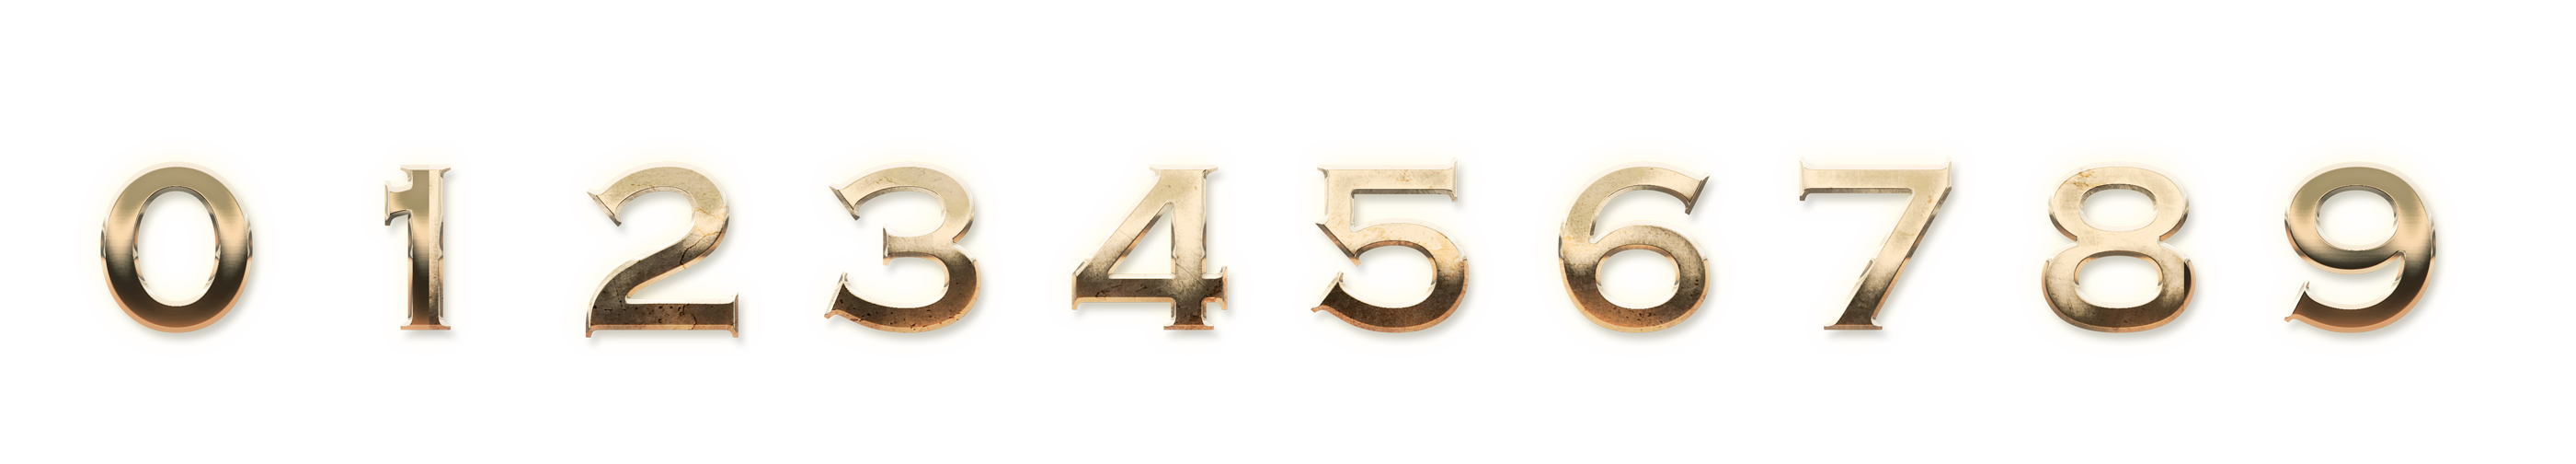 Number ZERO - NINE digit 0 - 9 gold text typography PNG images free